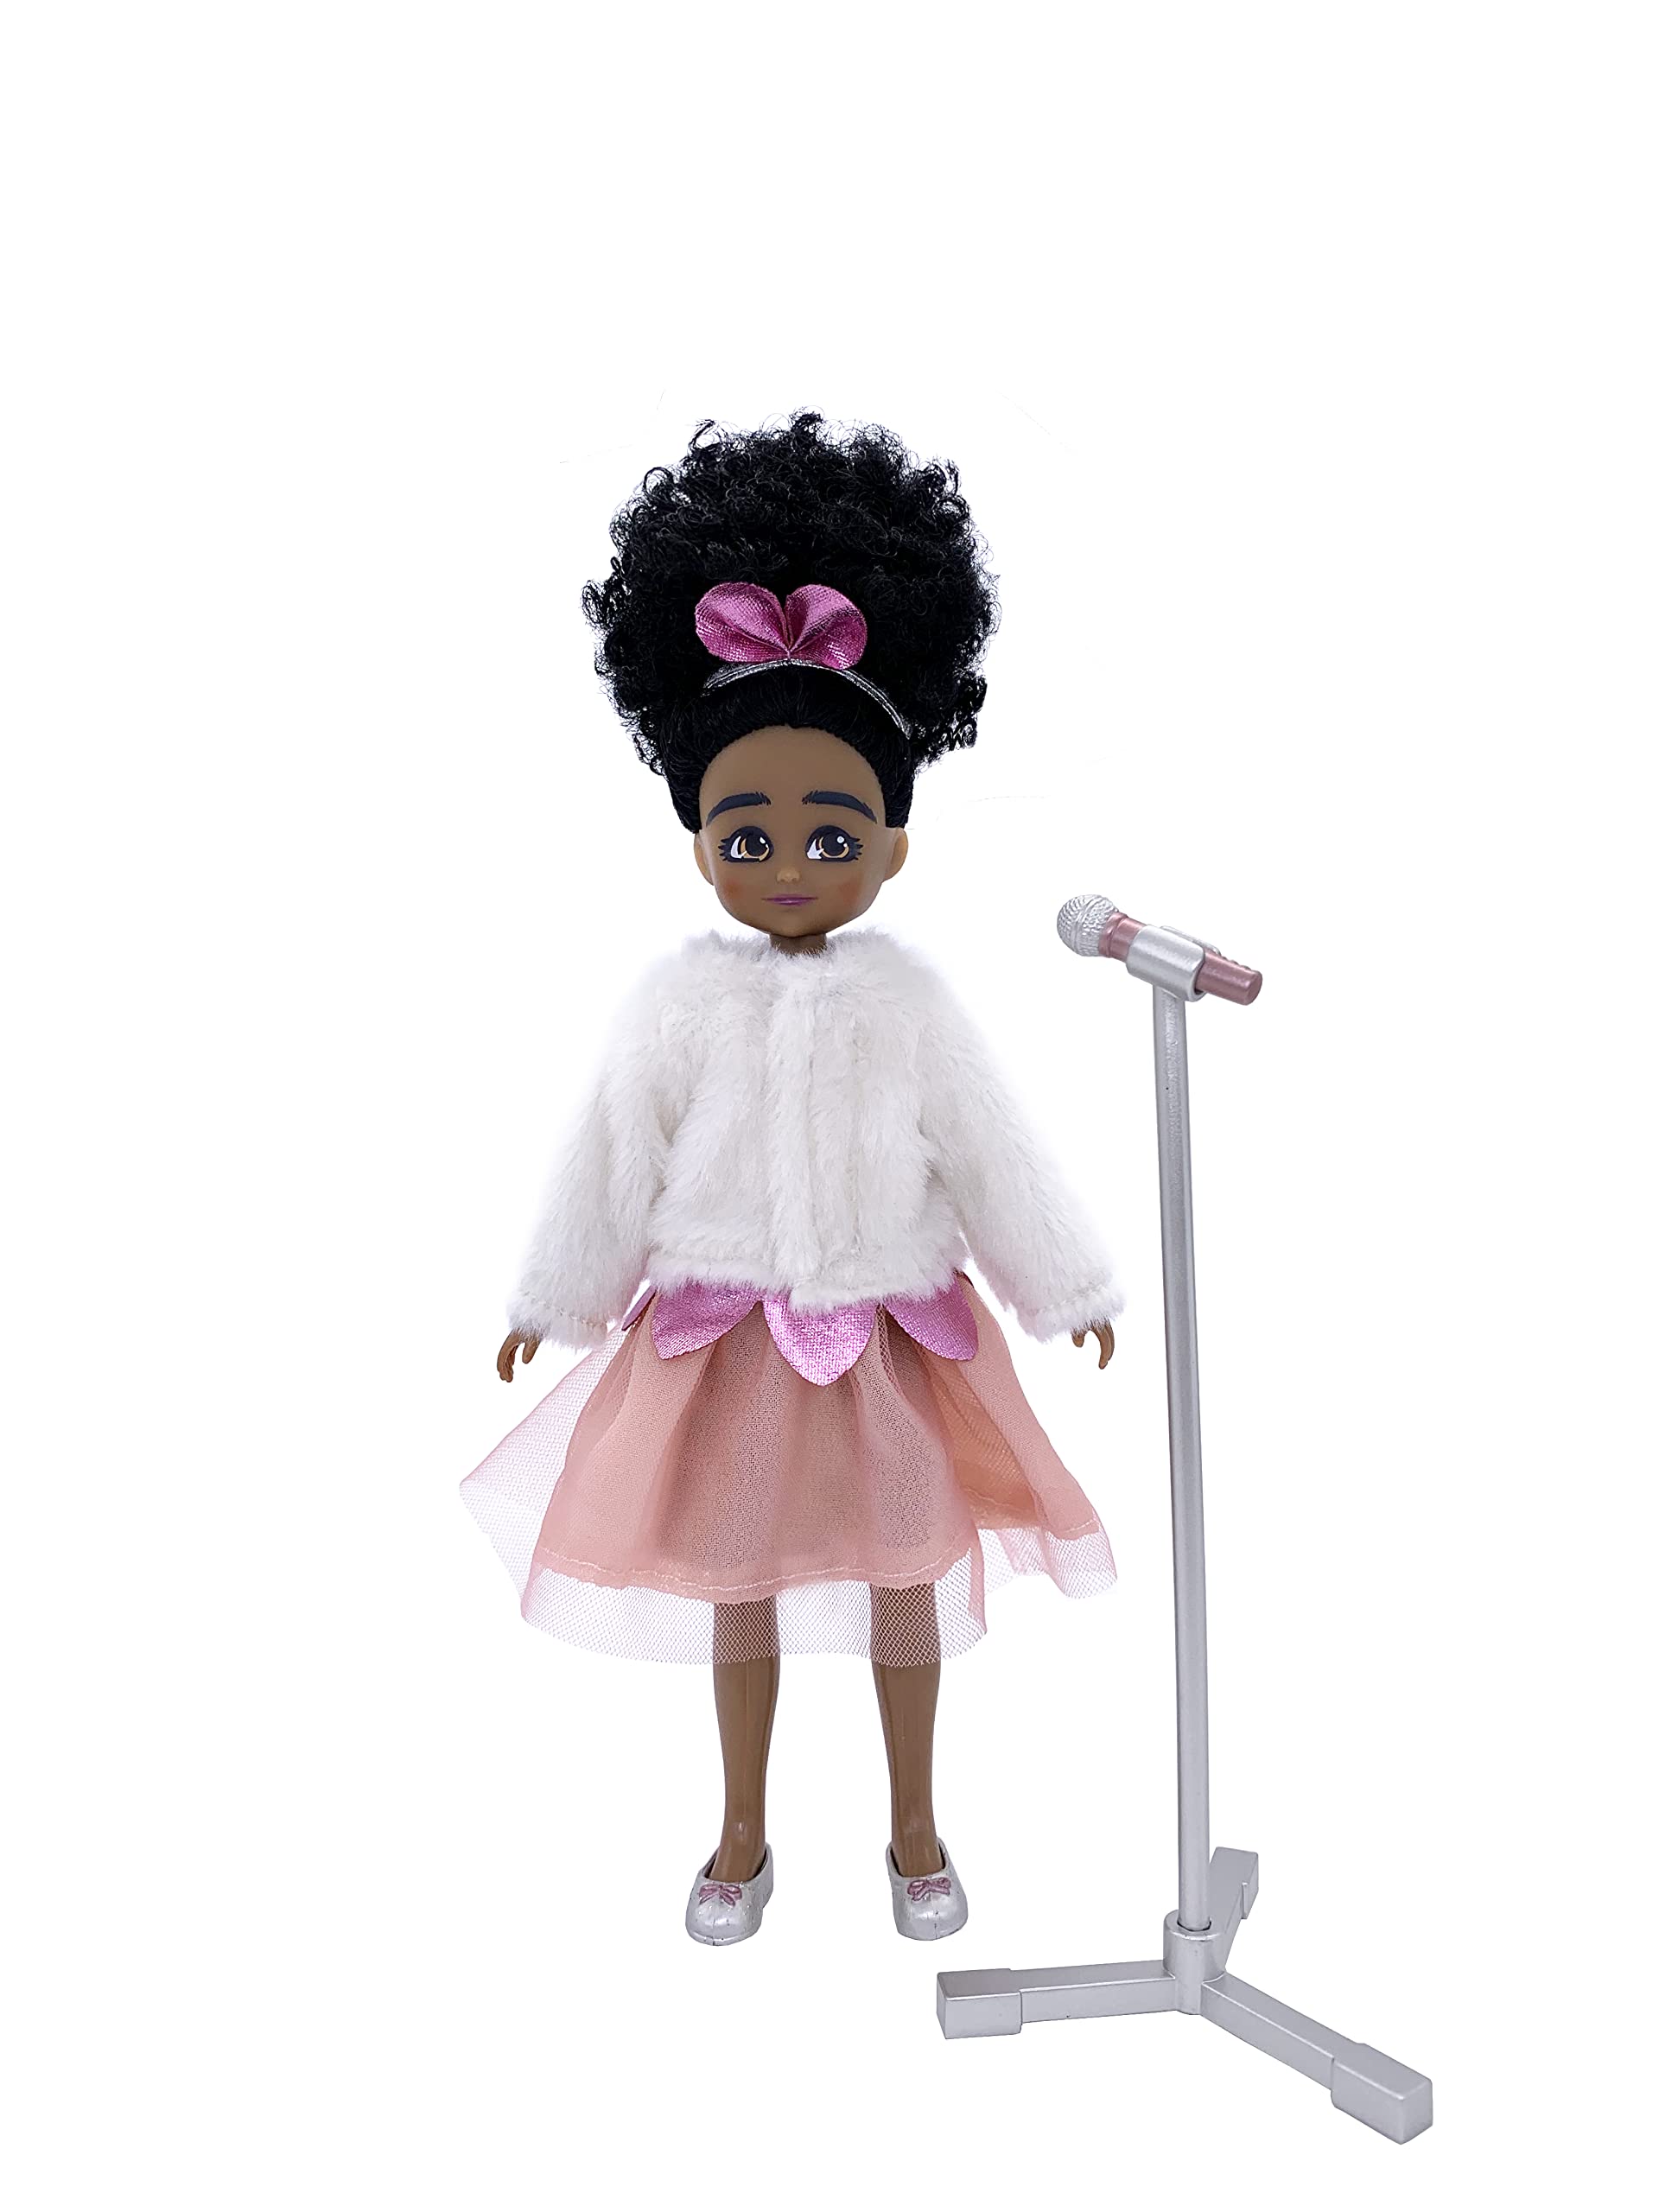 Lottie Stage Superstar Doll | Toys for Girls and Boys | Muñeca | Gifts for 3 4 5 6 7 8 Year Old | Small 7.5 inch